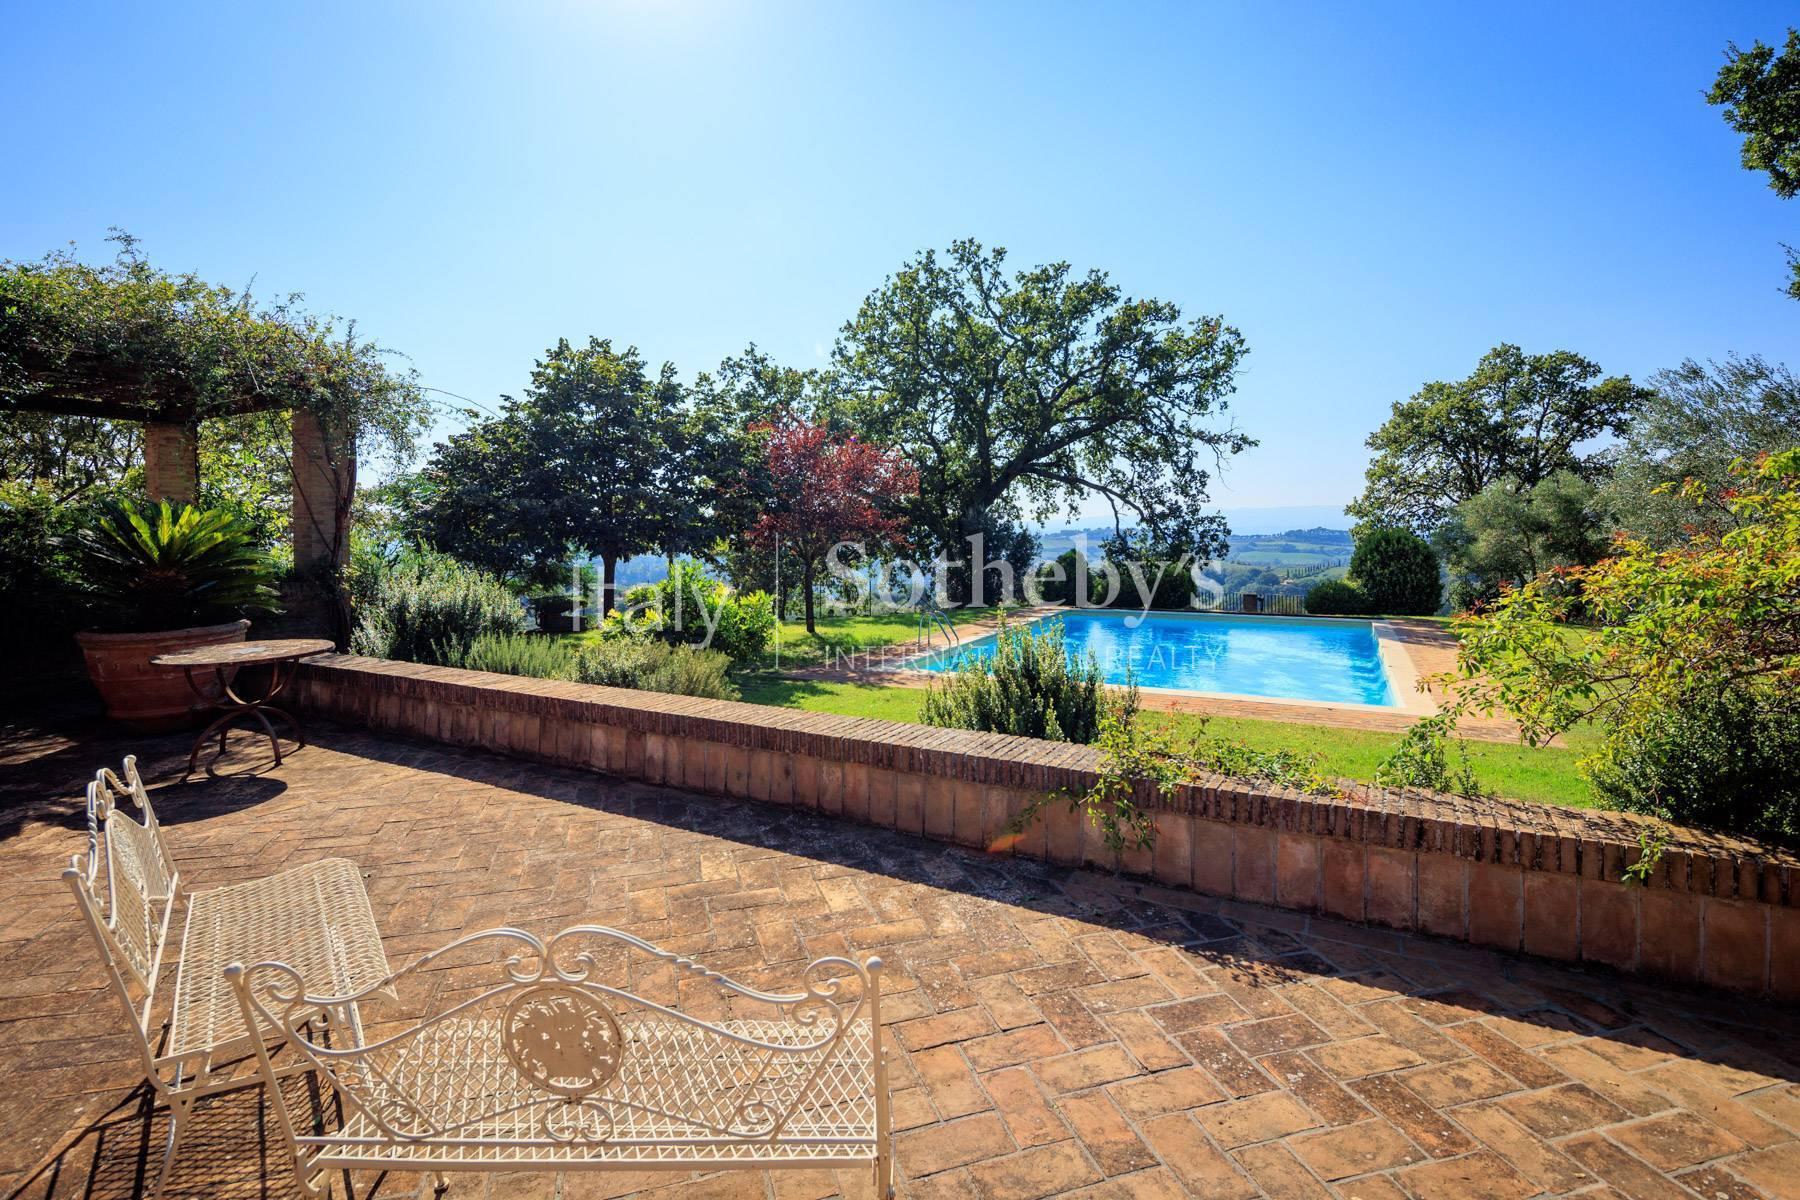 Villa with view and pool in Calvi dell' Umbria - 5